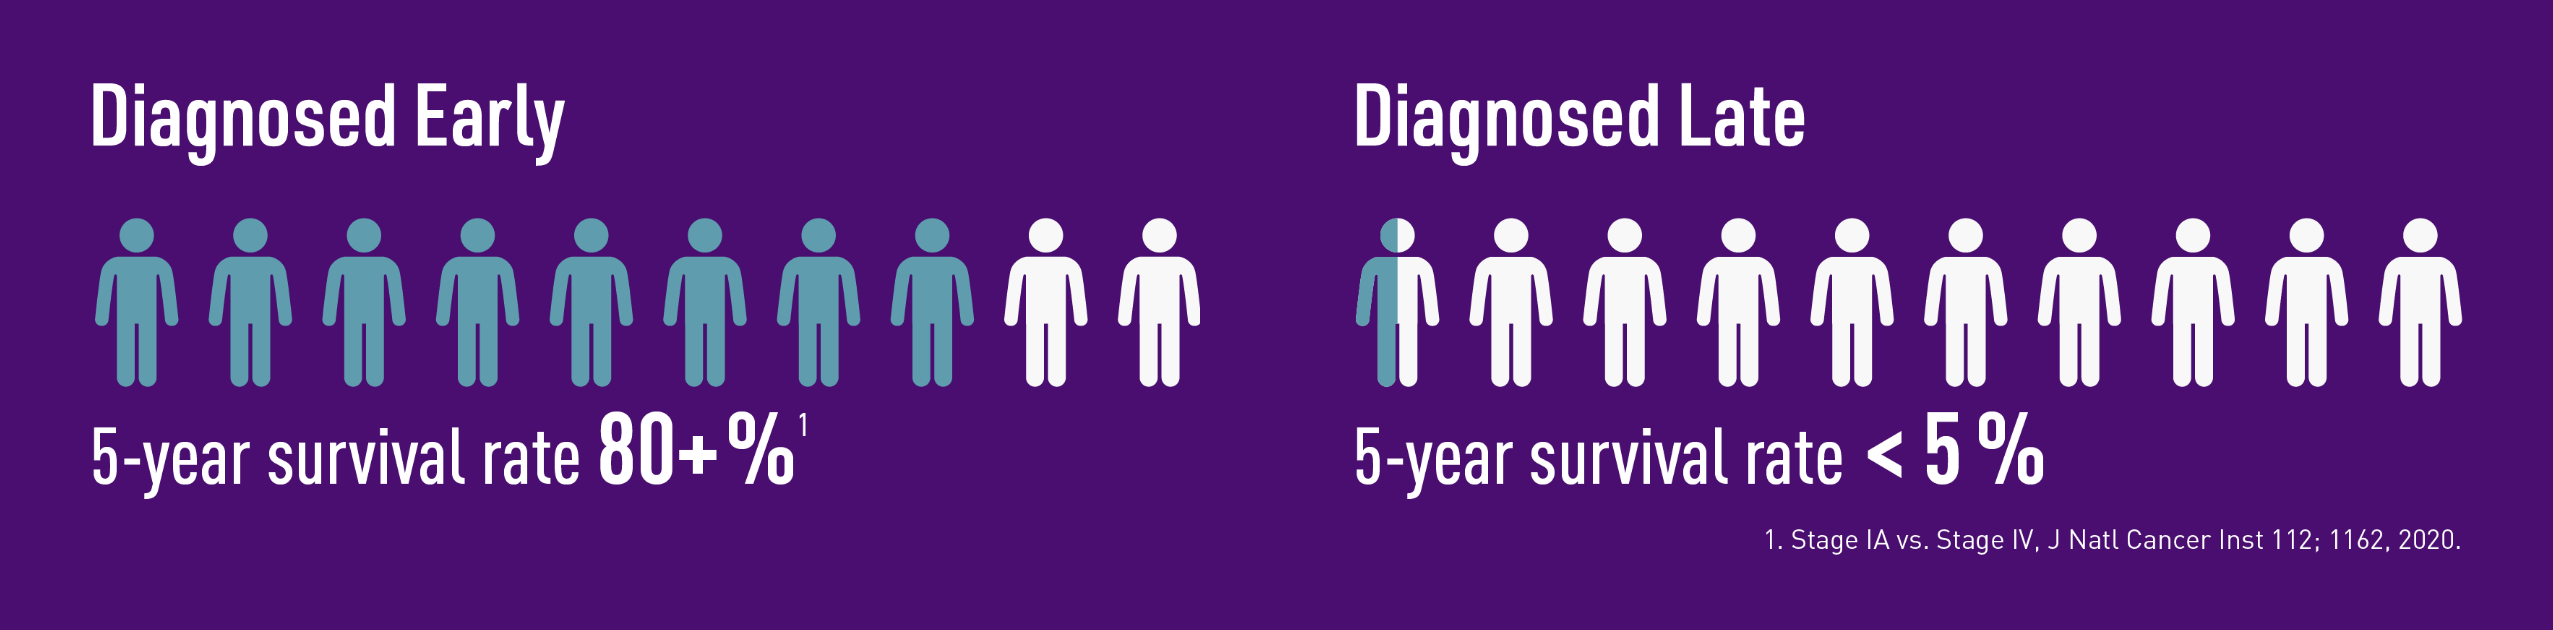 Diagnosed early/late: Diagnosed at the earliest stage, the 5-year survival rate is over 80%, but diagnosed late, it’s less than 5%